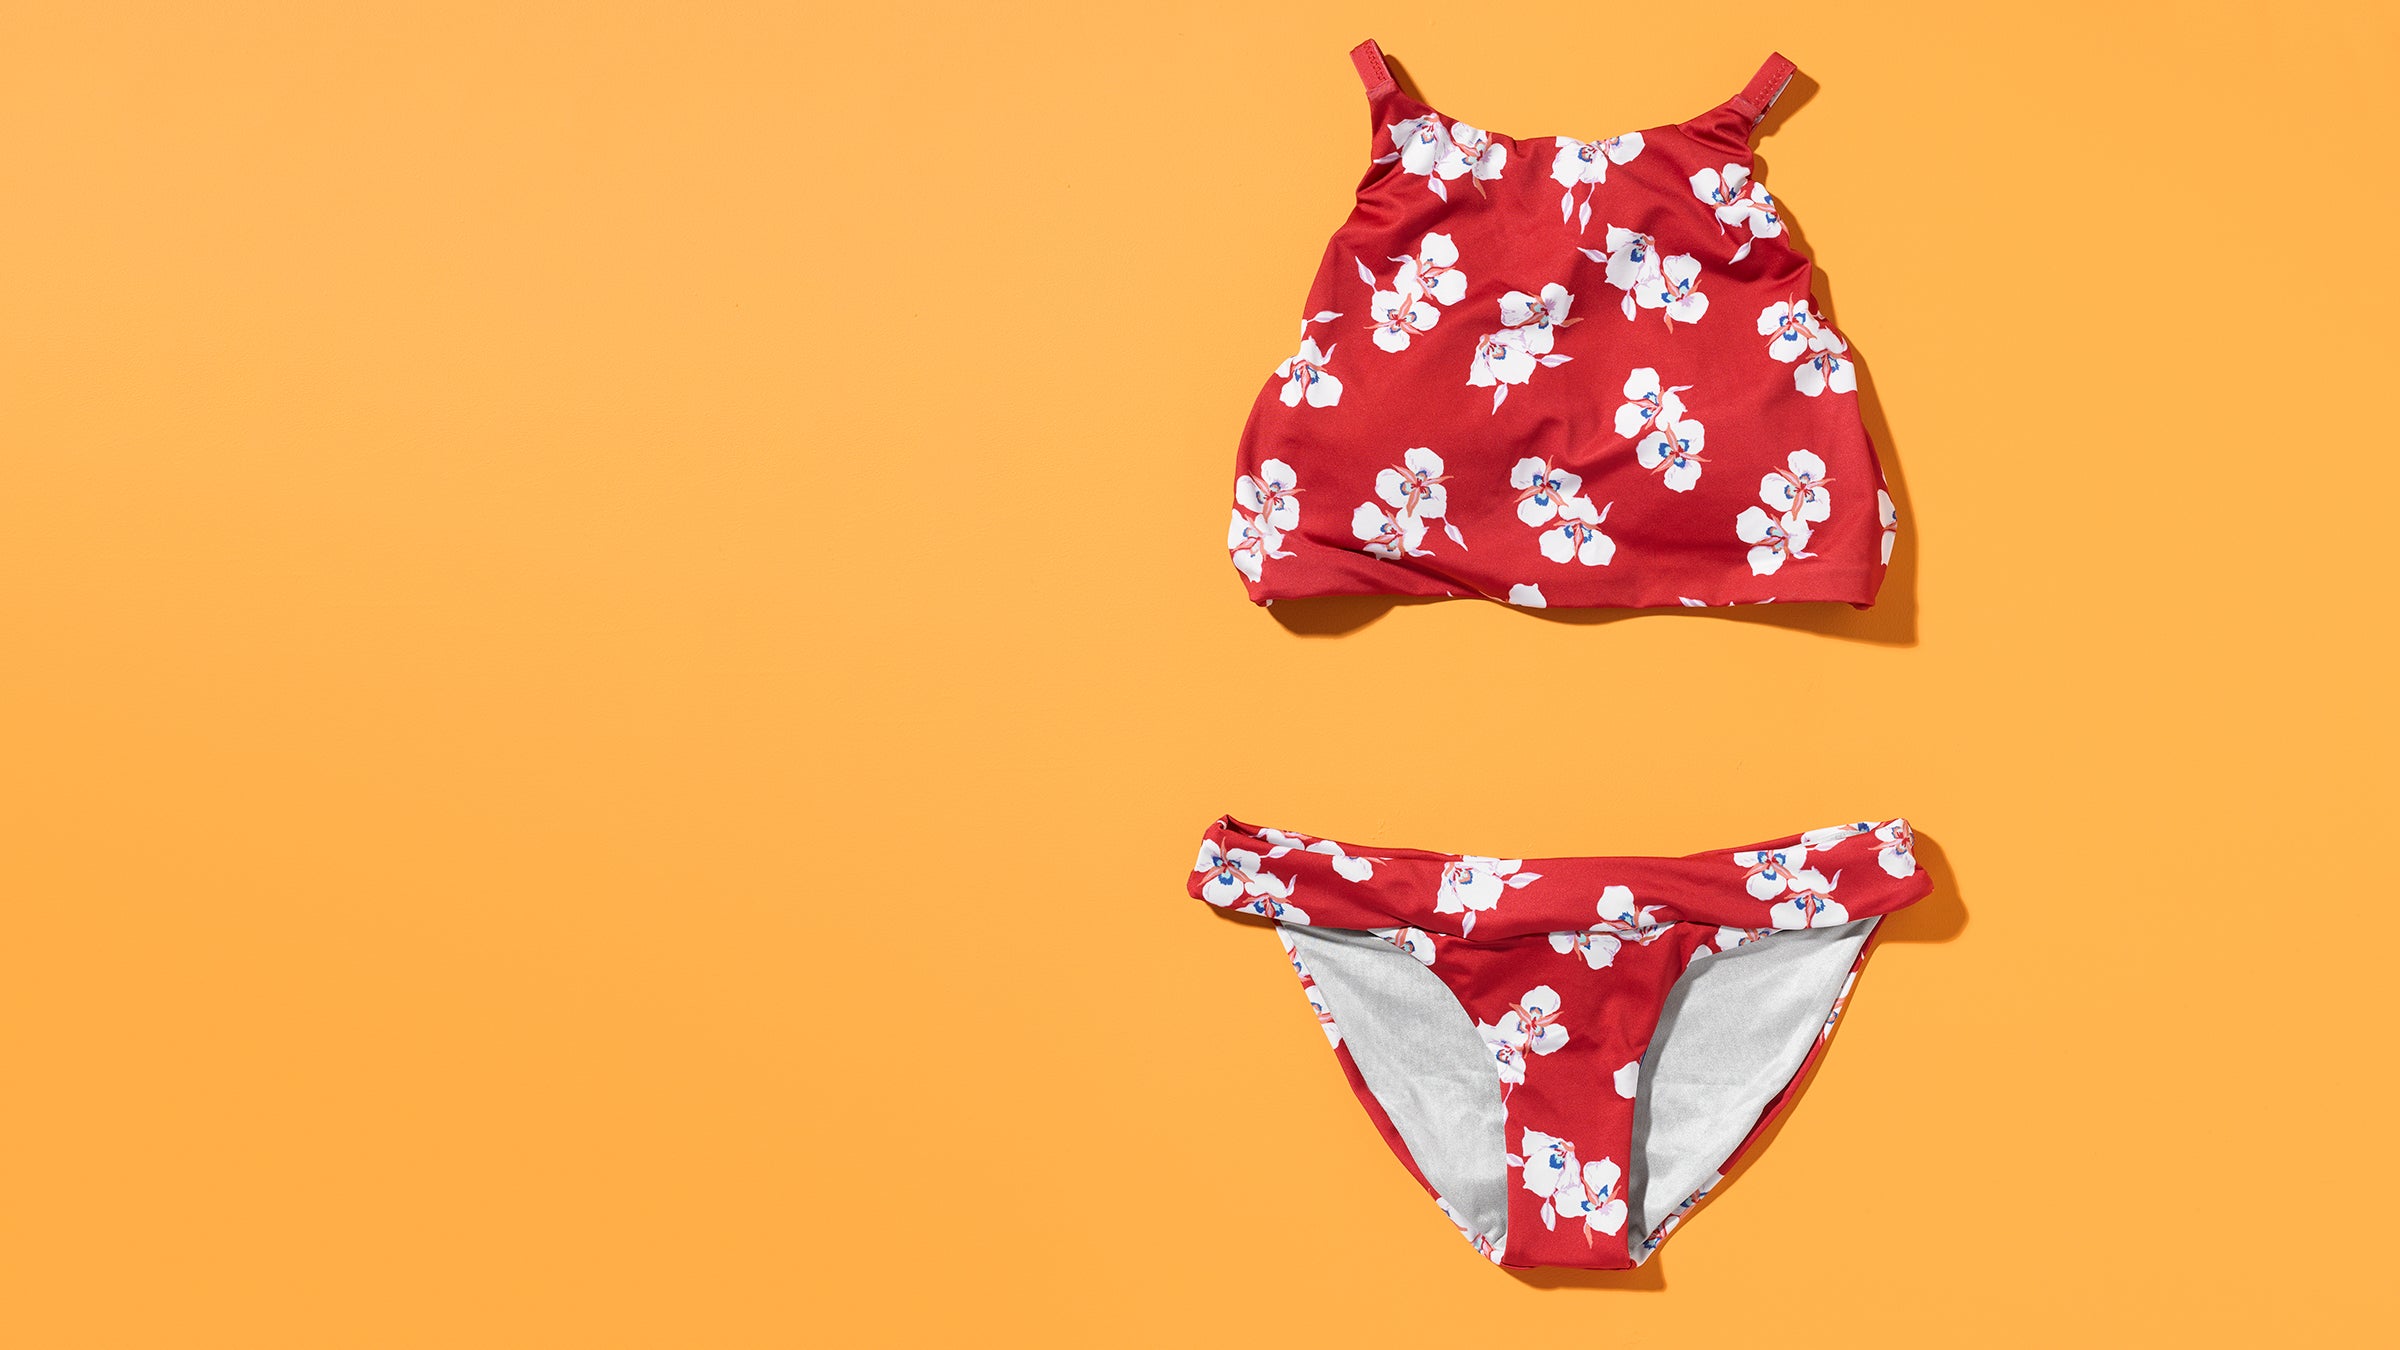 The Best Women's Swimsuits of 2018